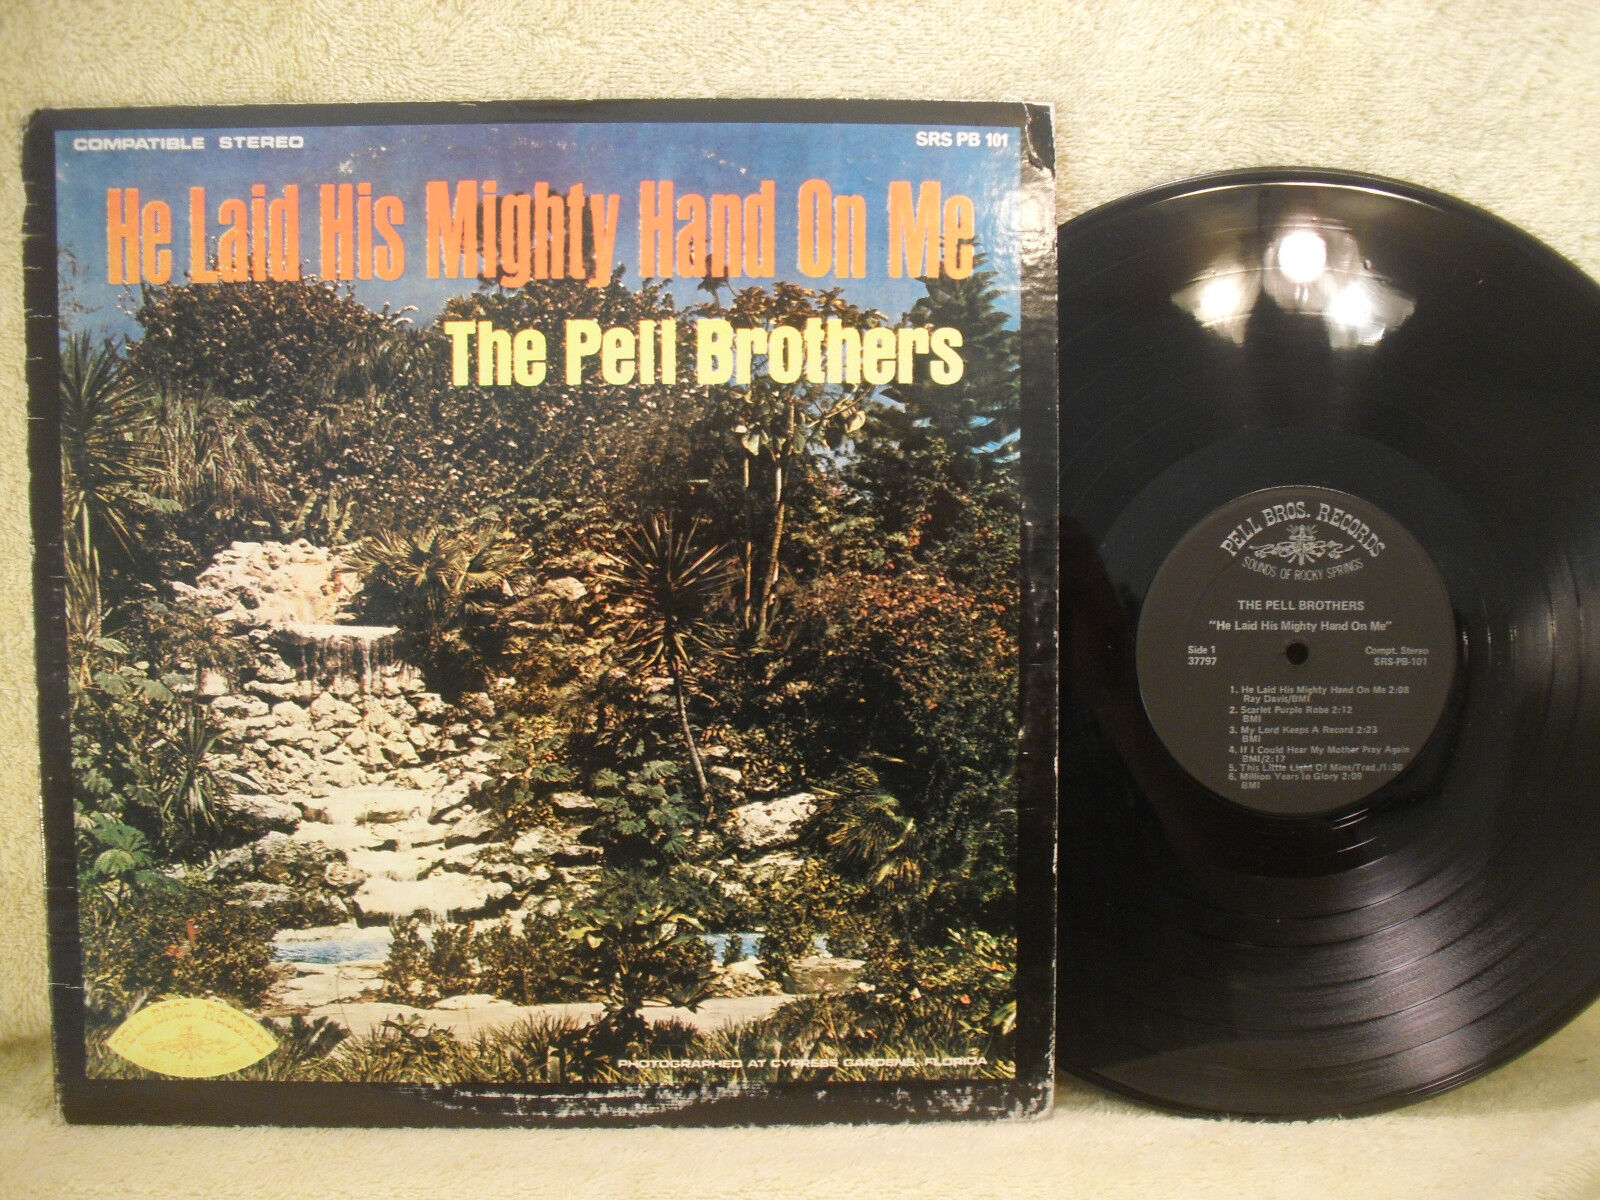 The Pell Brothers, He Laid His Mighty Hand On Me, Sounds of Rocky Springs